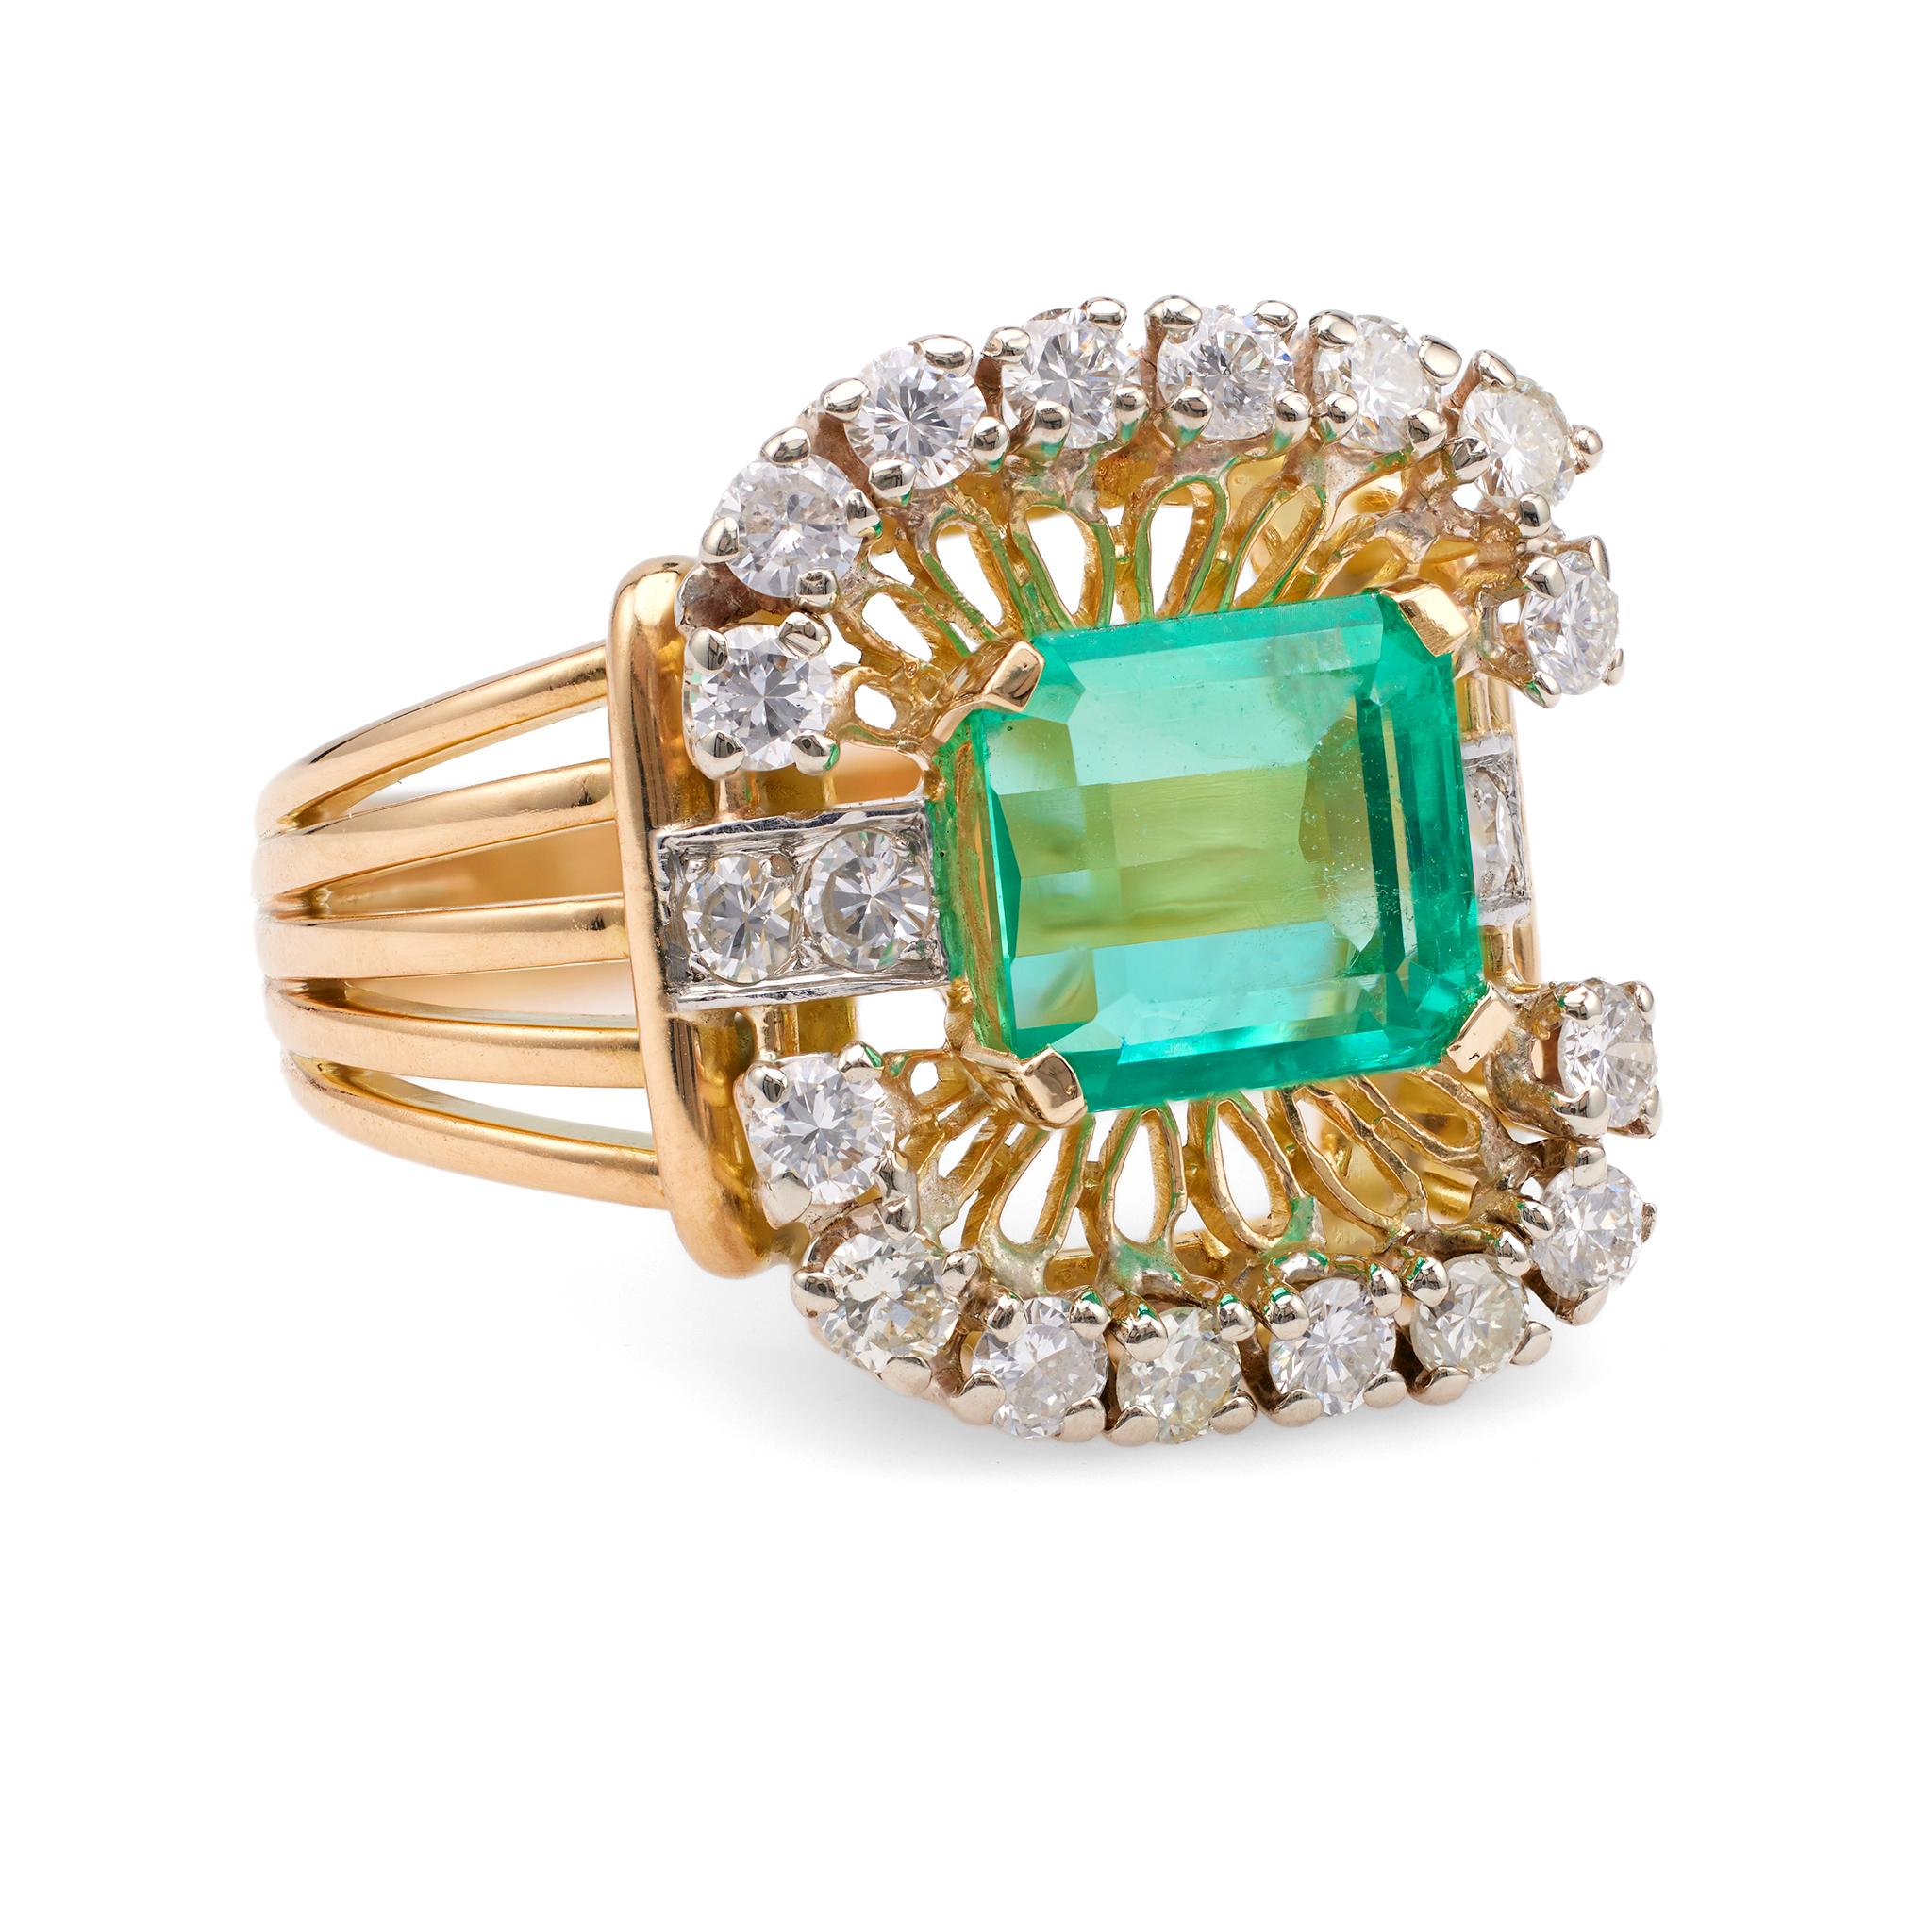 Retro French GIA 2.68 Carat Colombian Emerald Diamond 18k Yellow Gold Ring In Good Condition For Sale In Beverly Hills, CA